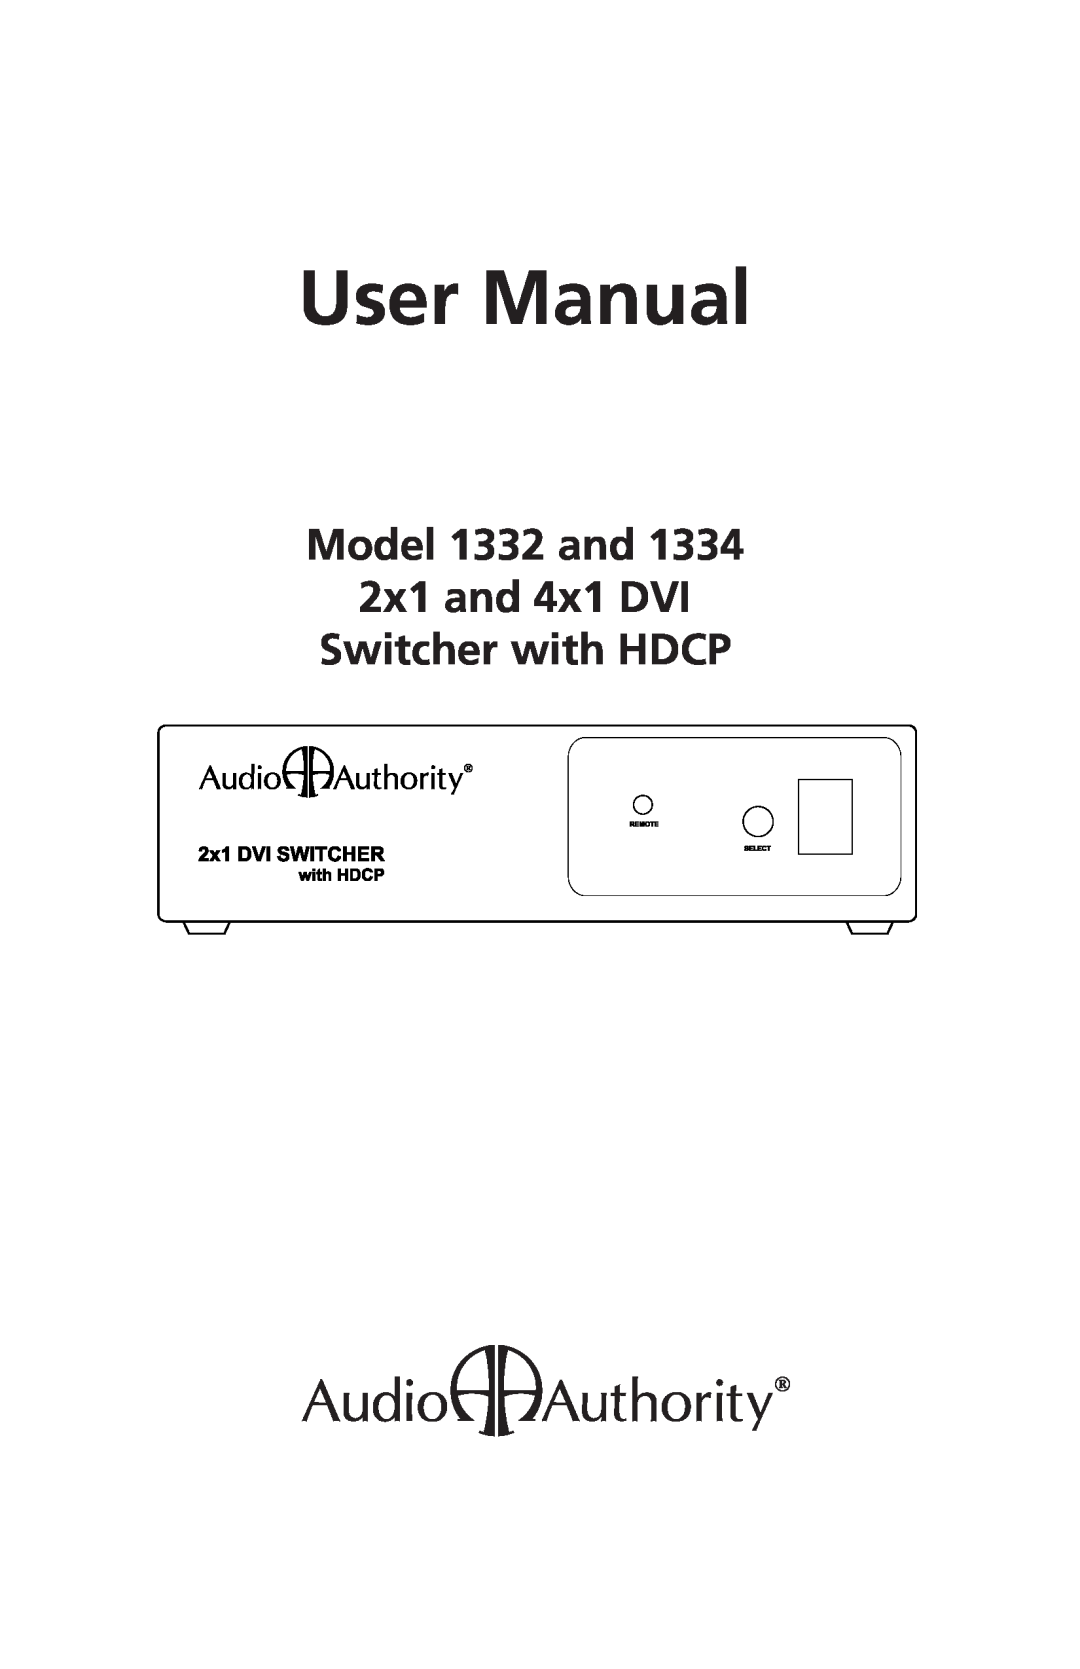 Audio Authority 1334 user manual User Manual, Model 1332 and 2x1 and 4x1 DVI Switcher with HDCP 